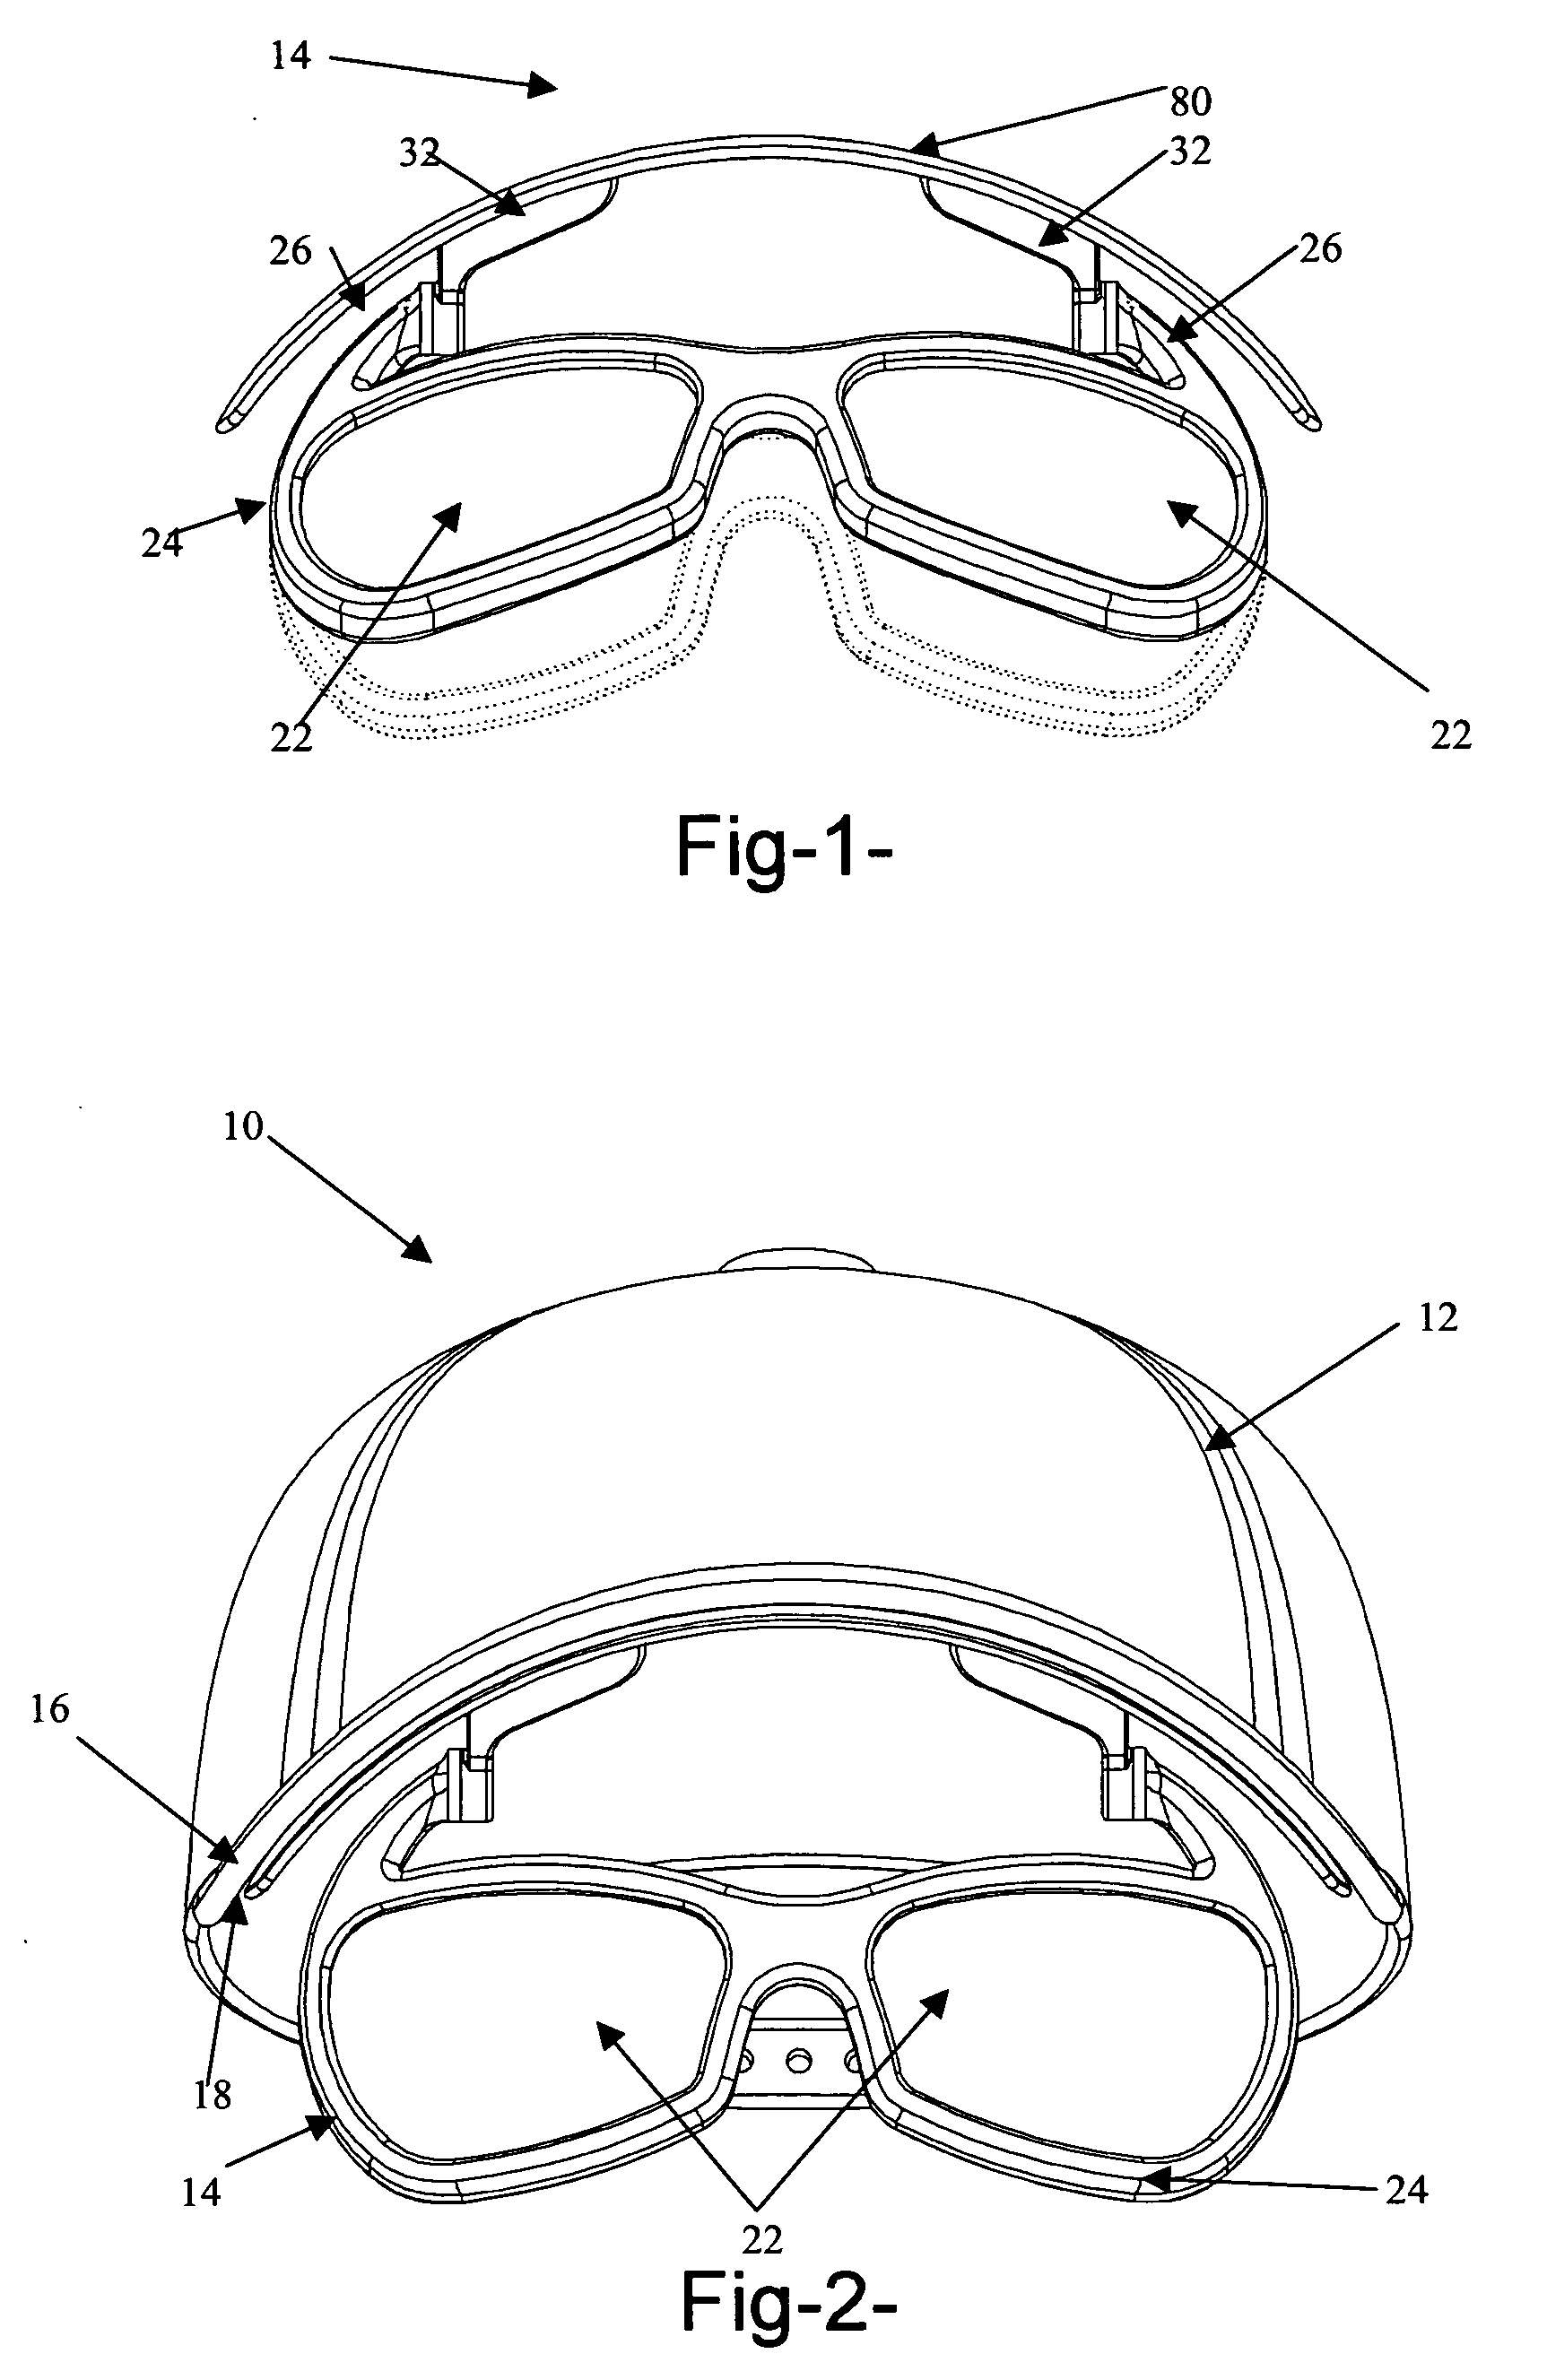 Eyewear assembly for attachment to headwear